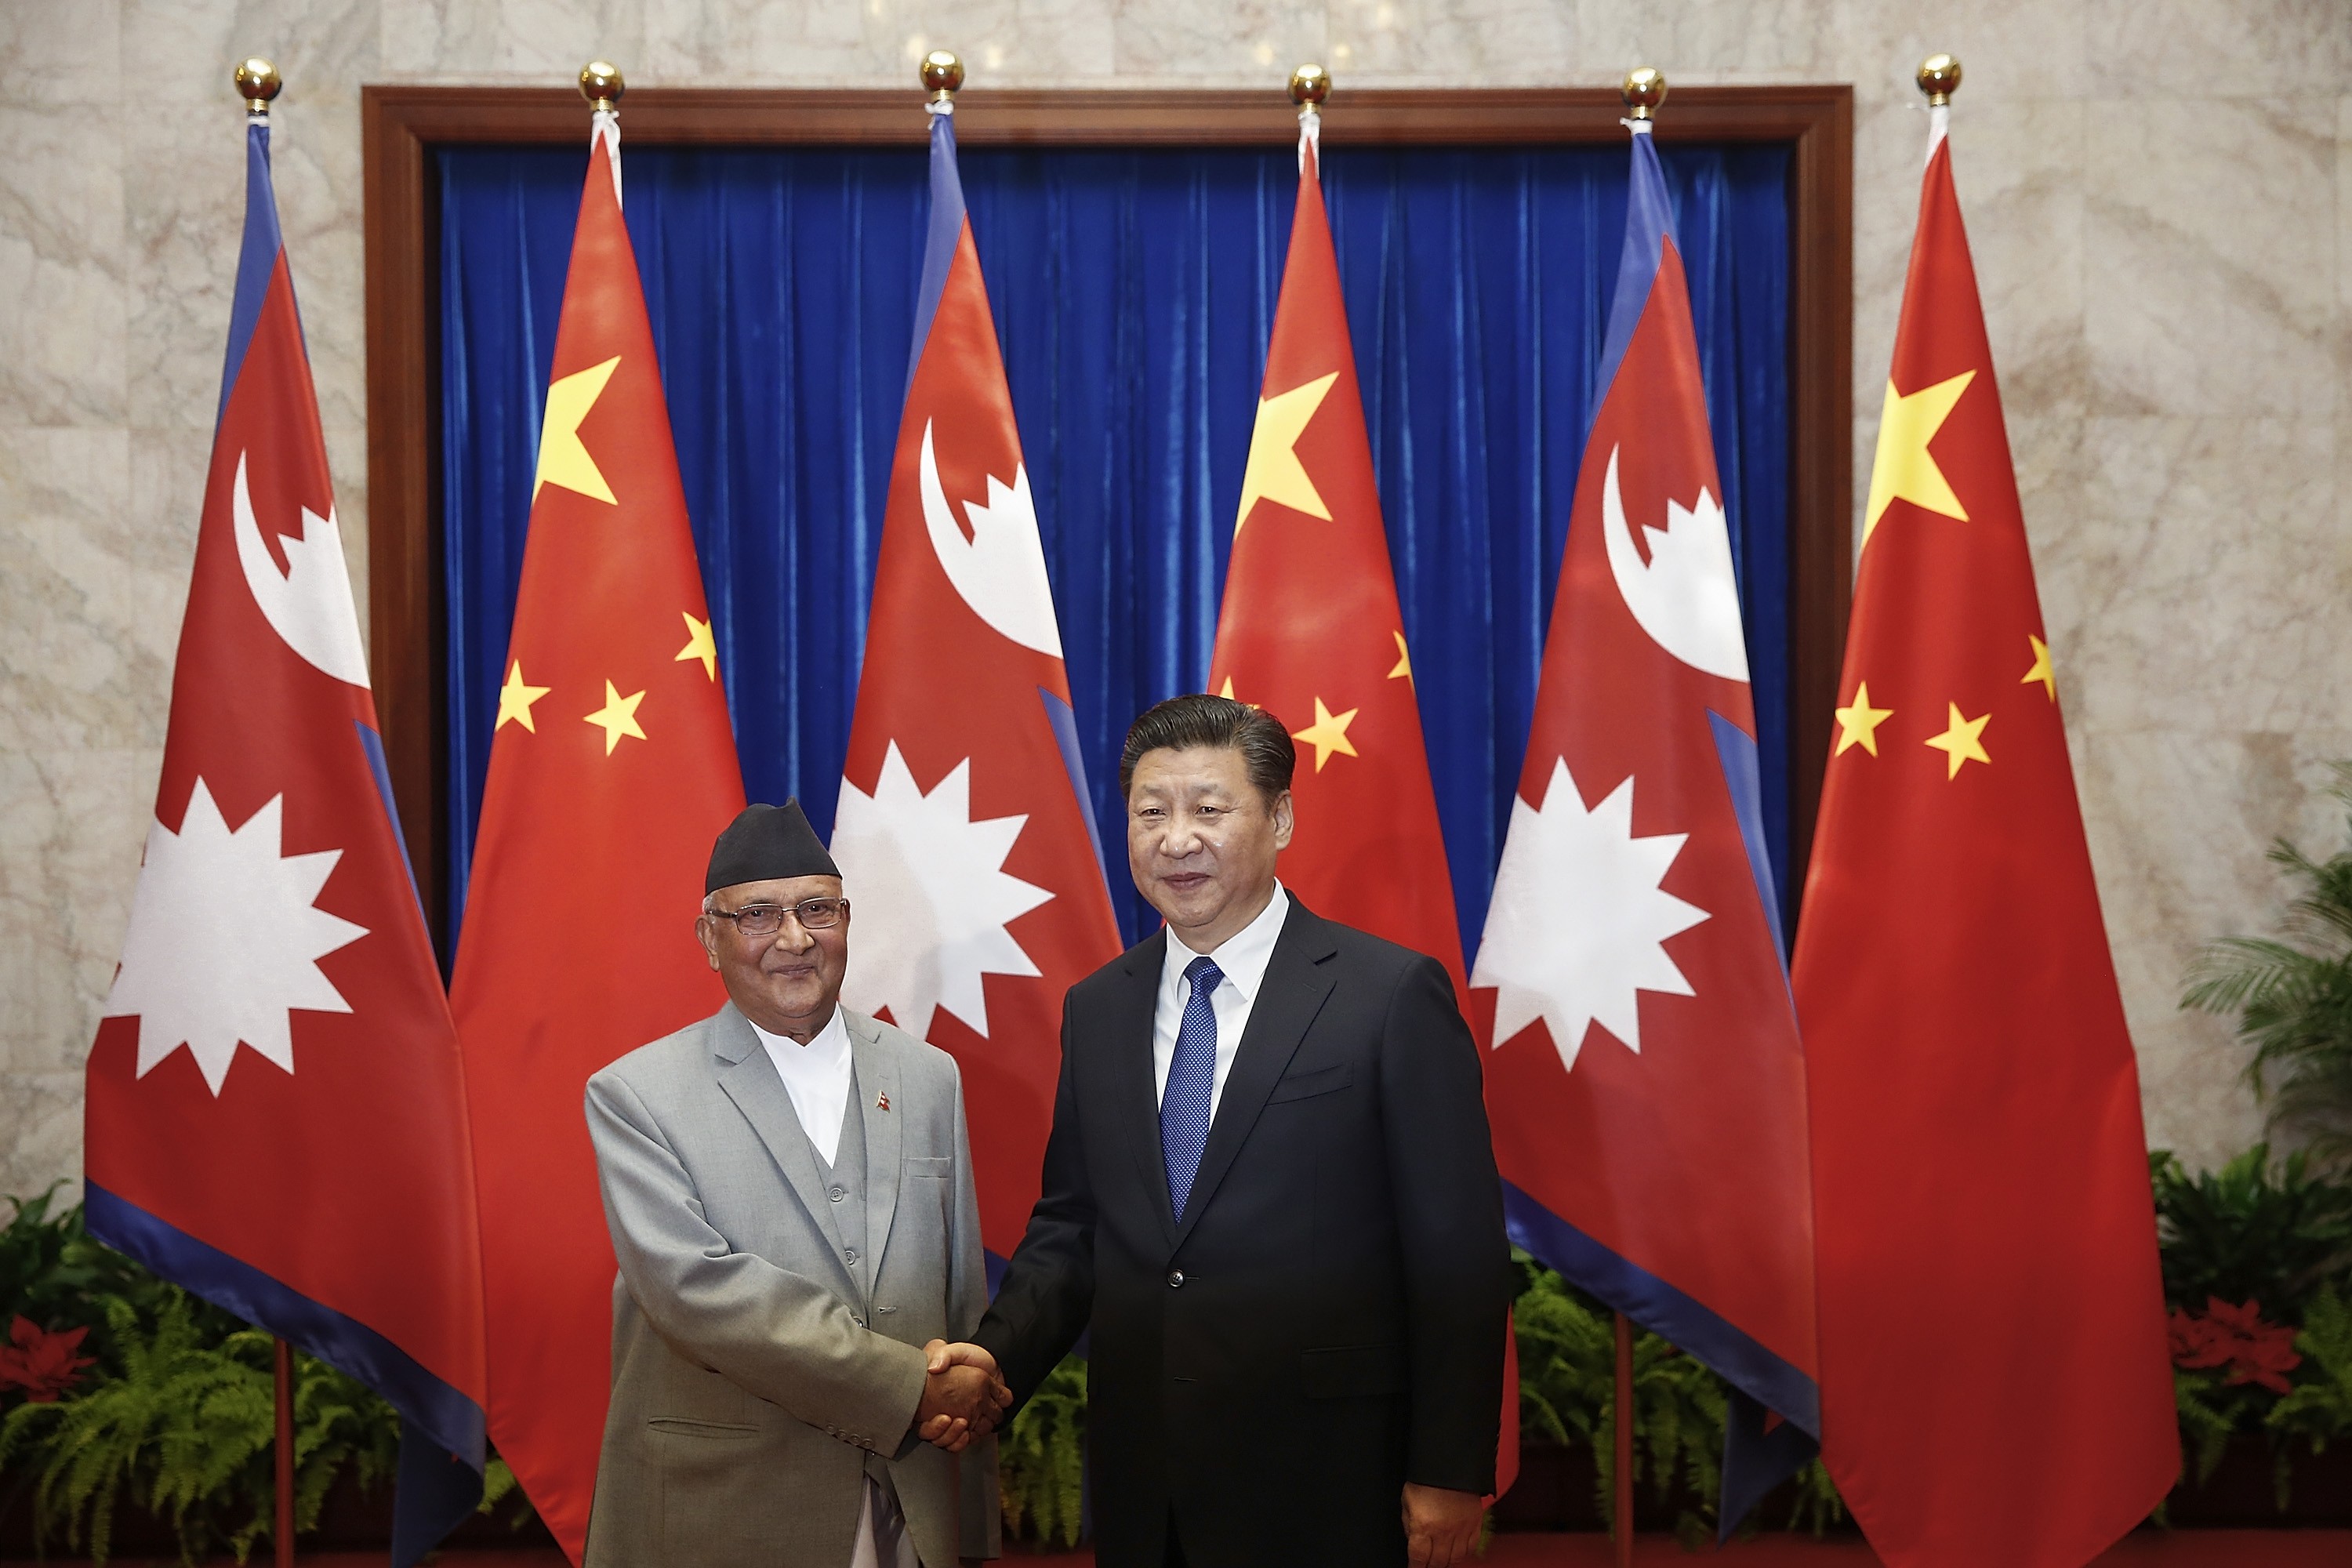 After successfully re-engaging India, Nepal’s leader may have new-found leverage in negotiating terms for major infrastructure projects with Beijing